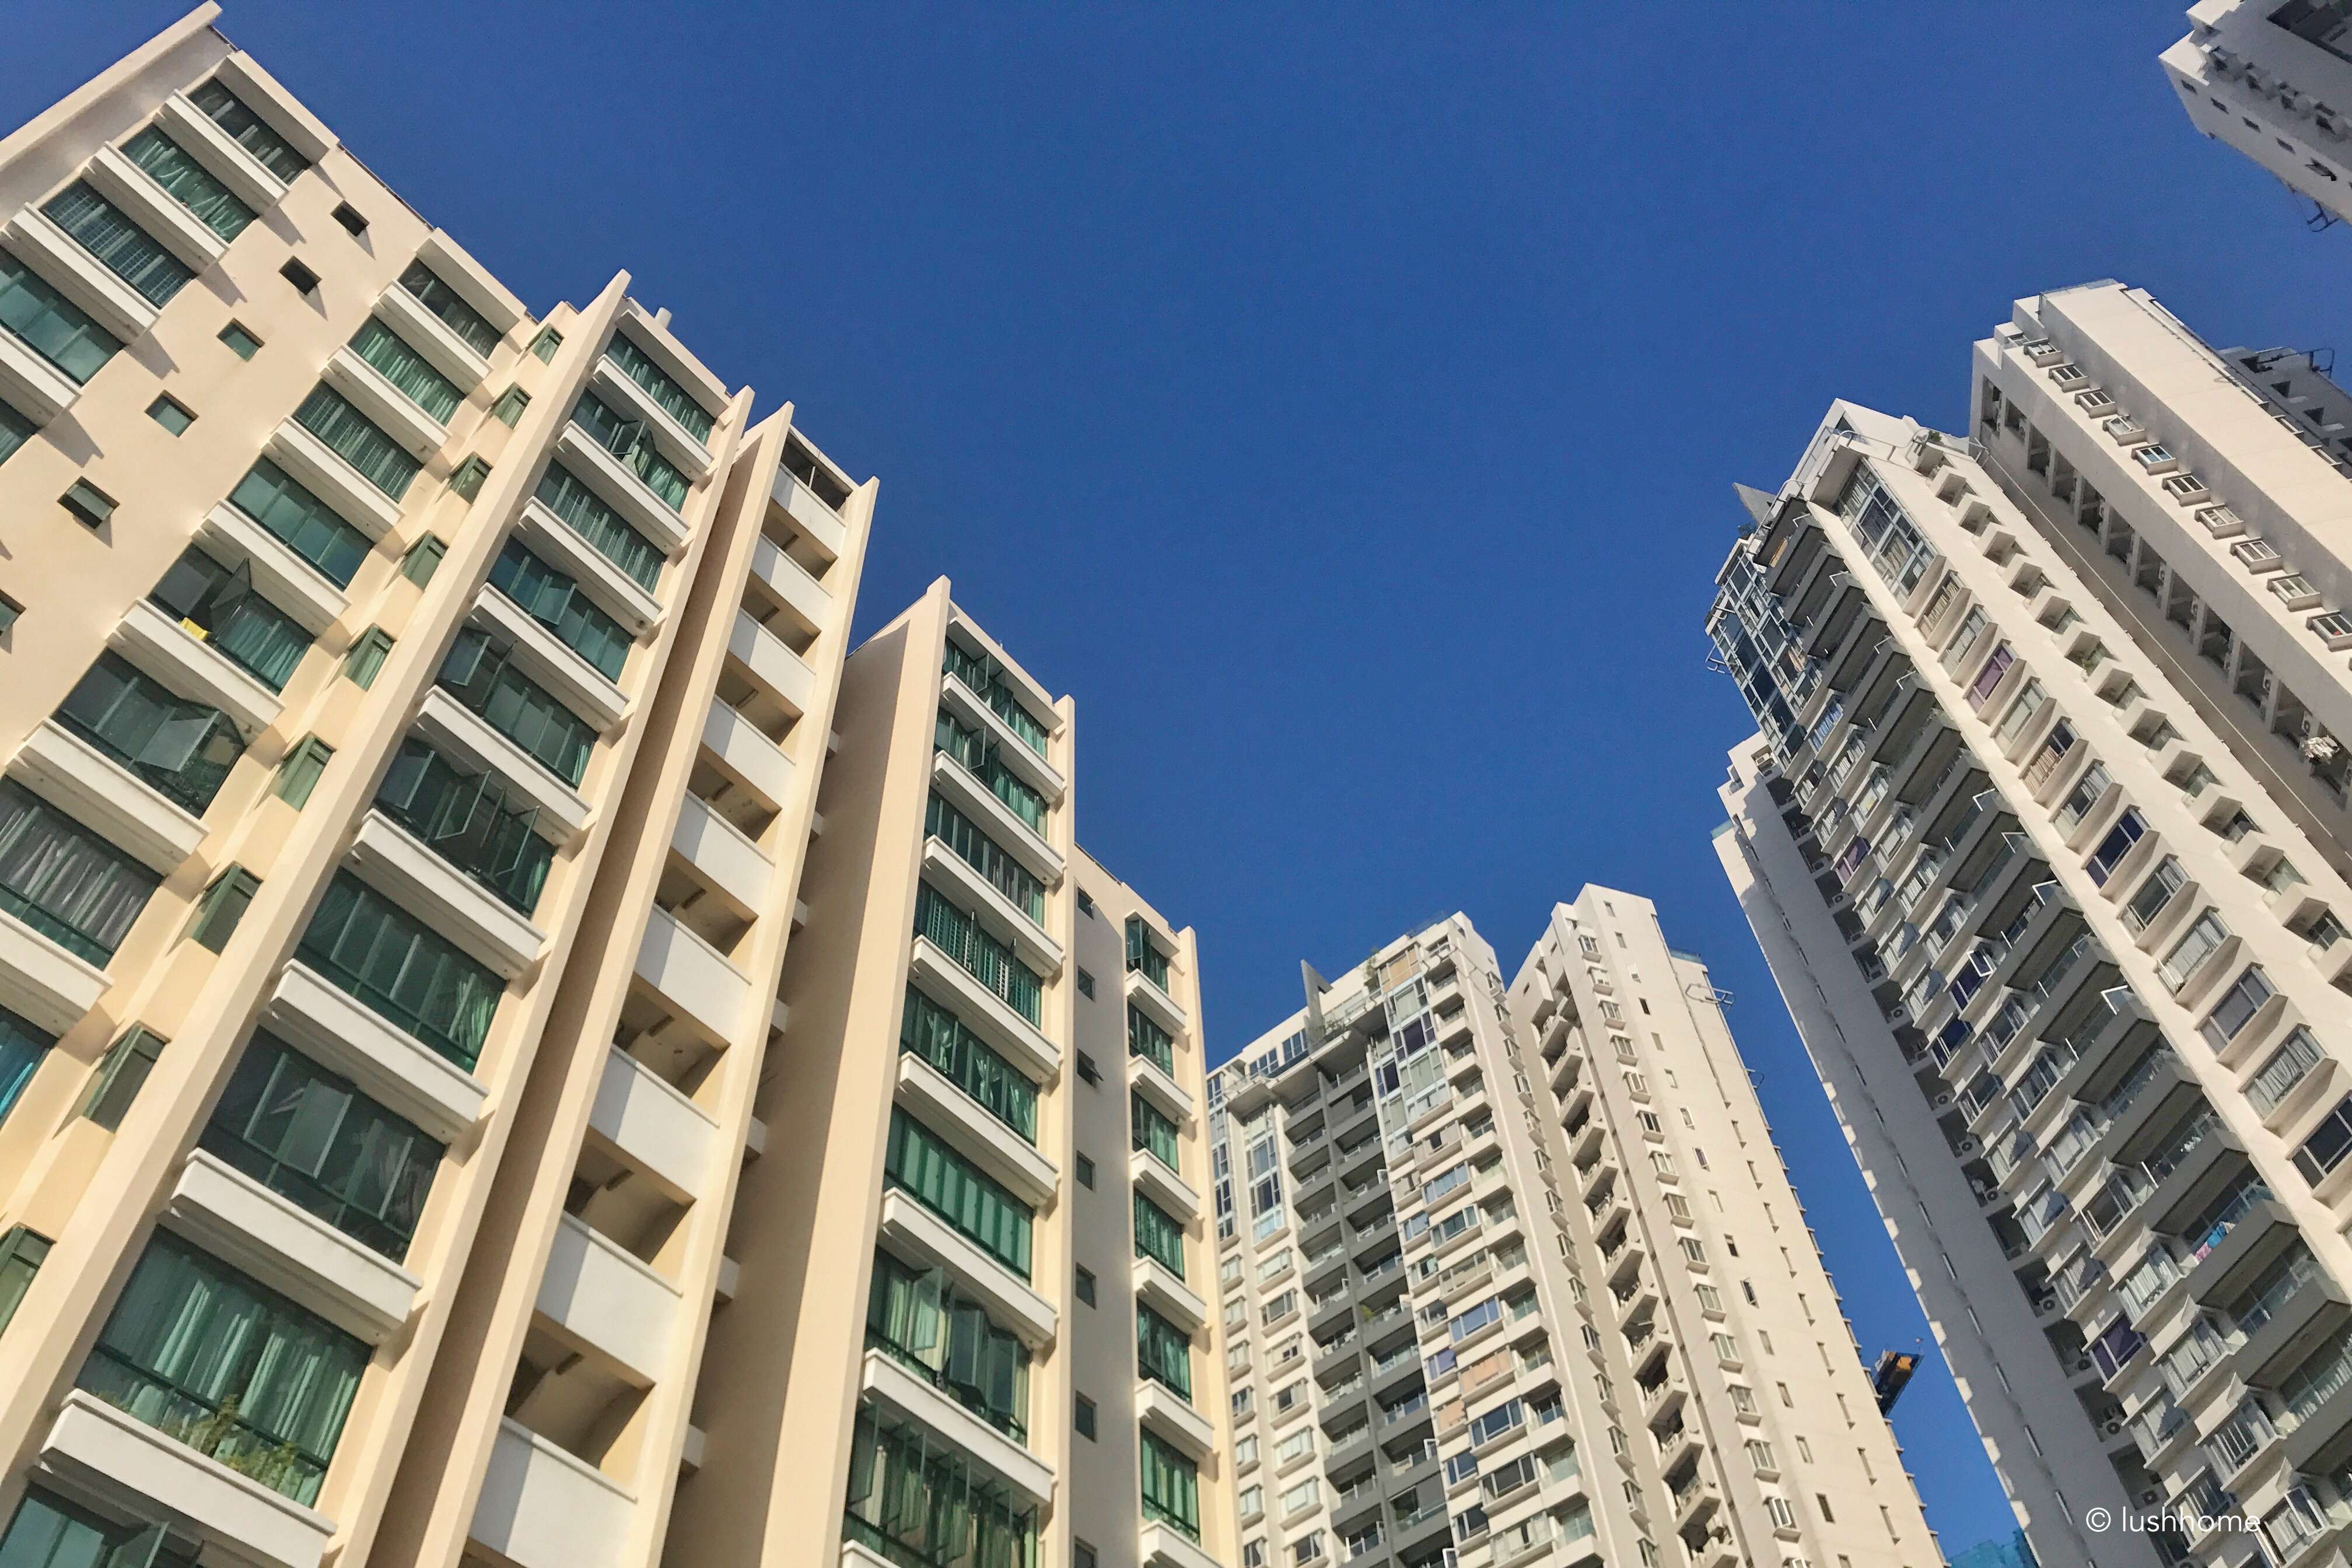 Property 2020 — Few policy changes ahead but Sers, co-living to excite the market